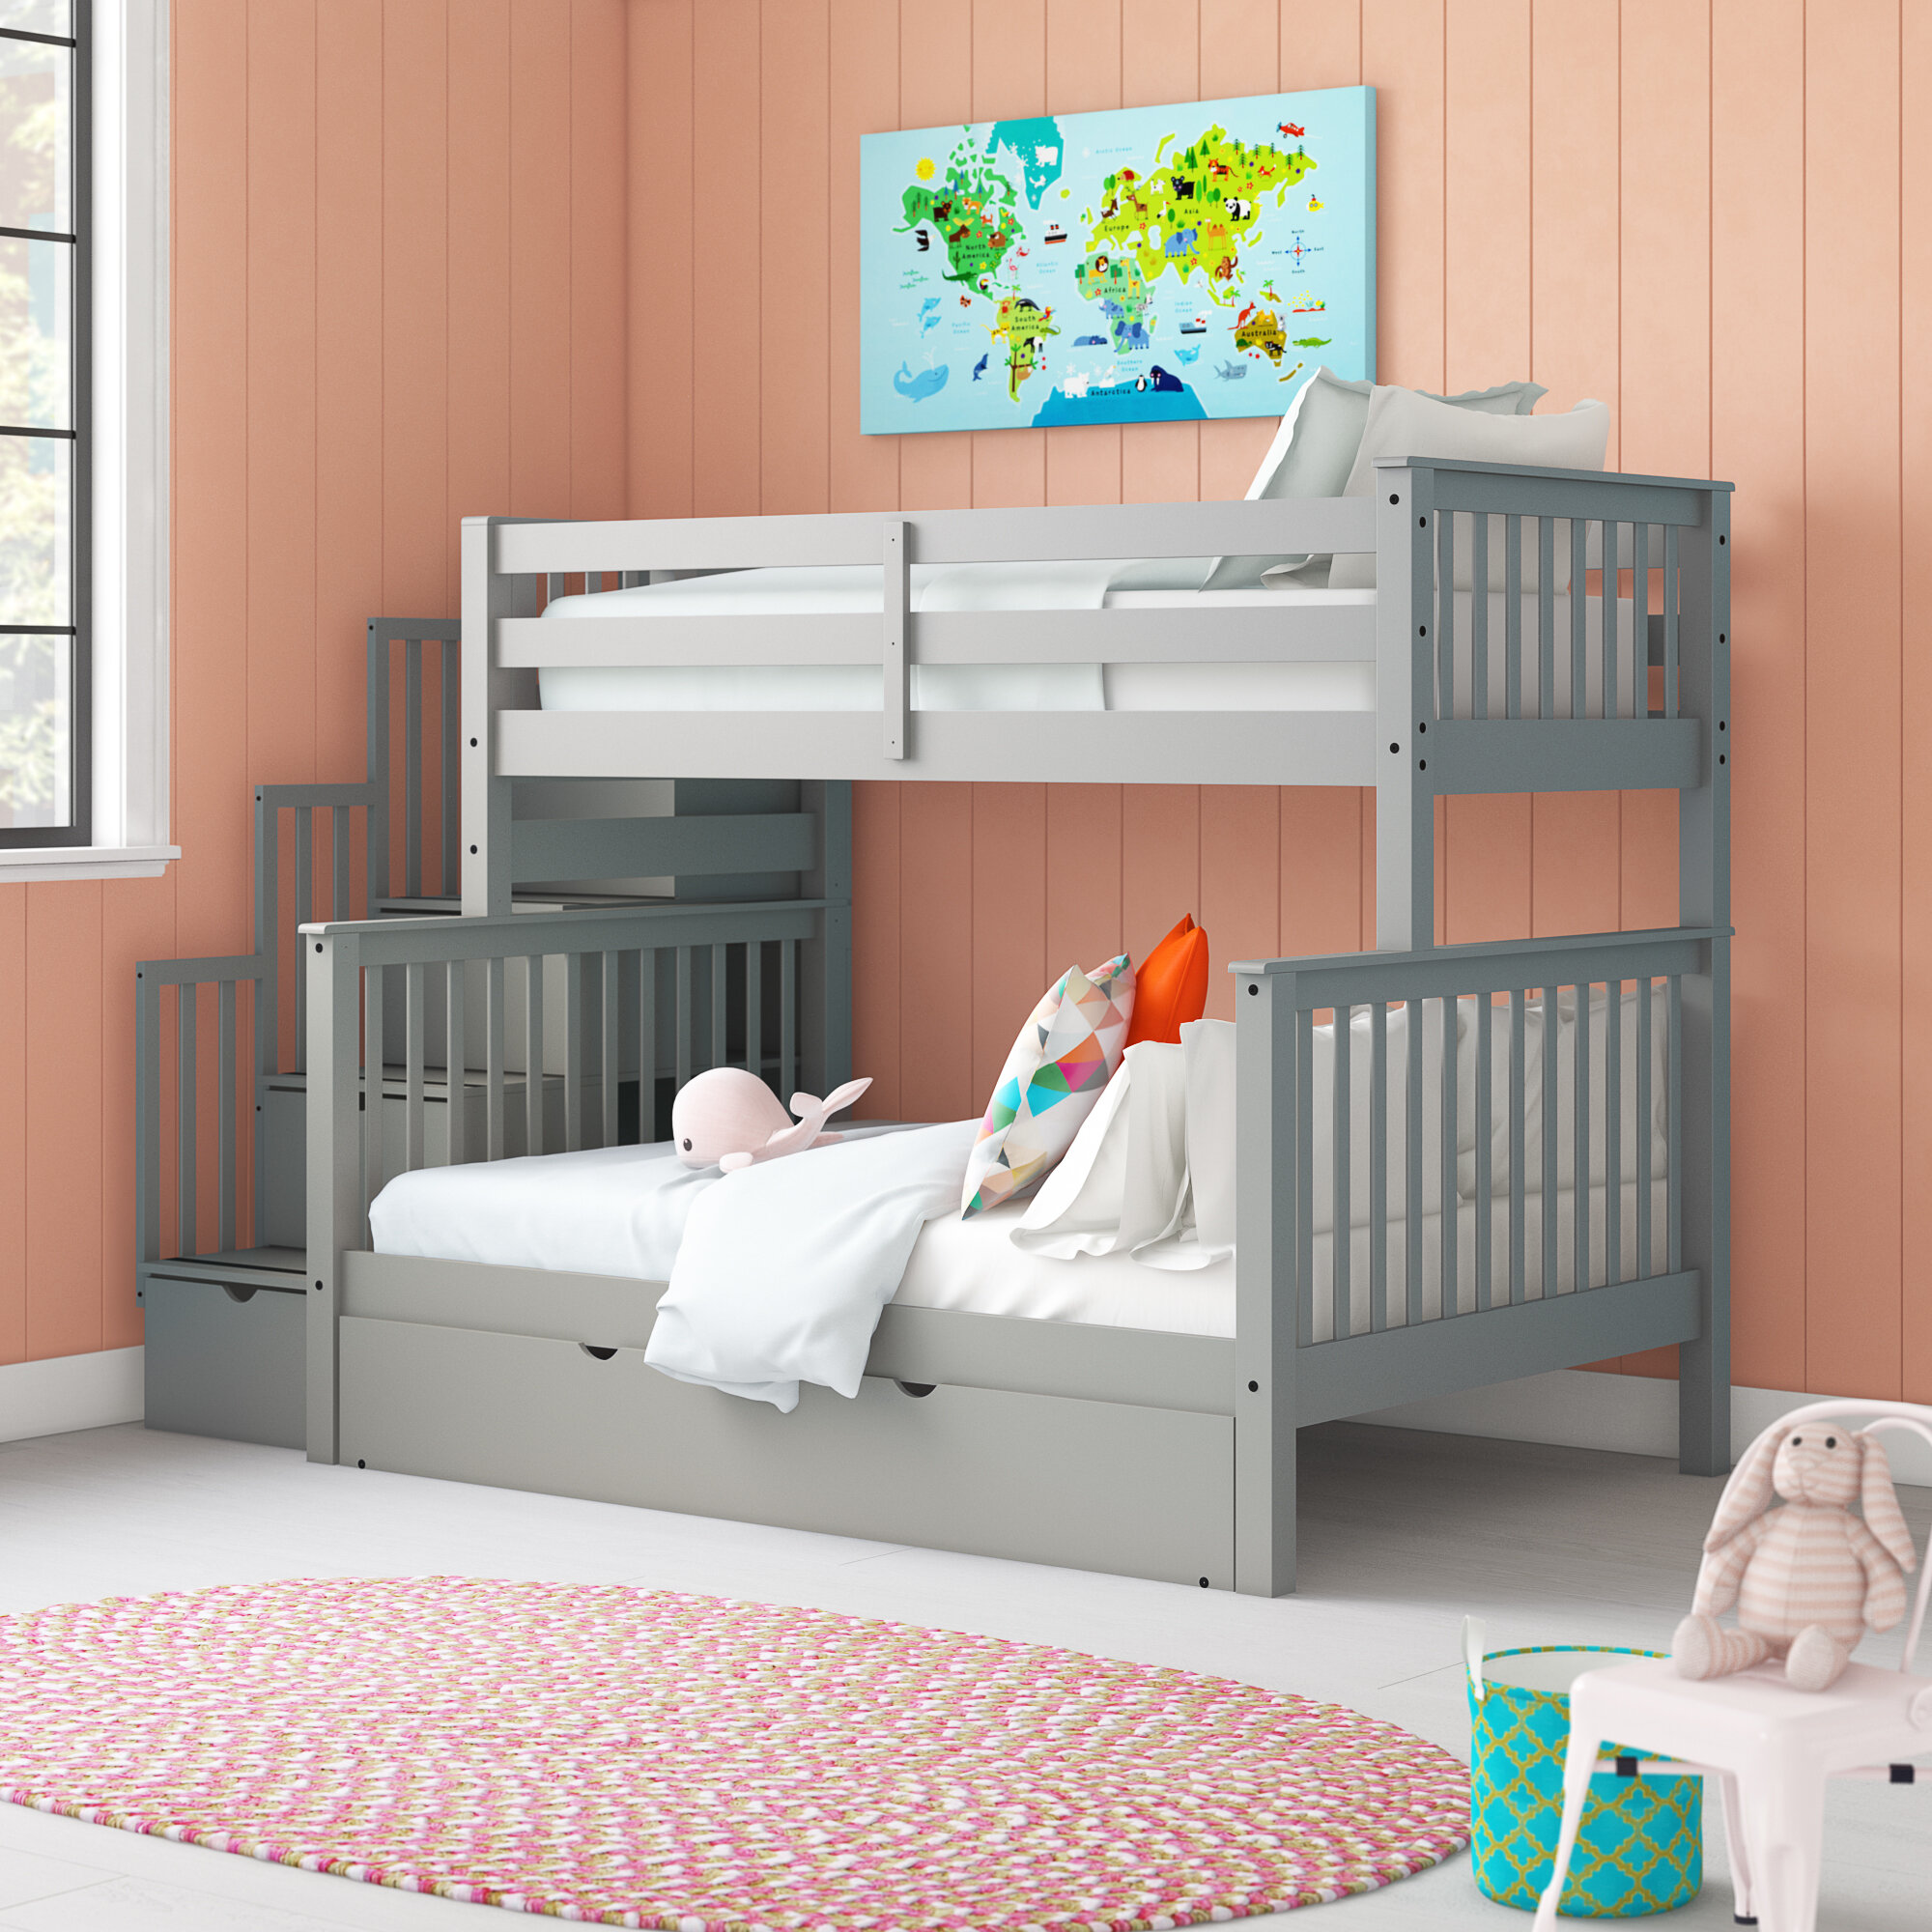 bunk beds that can separate